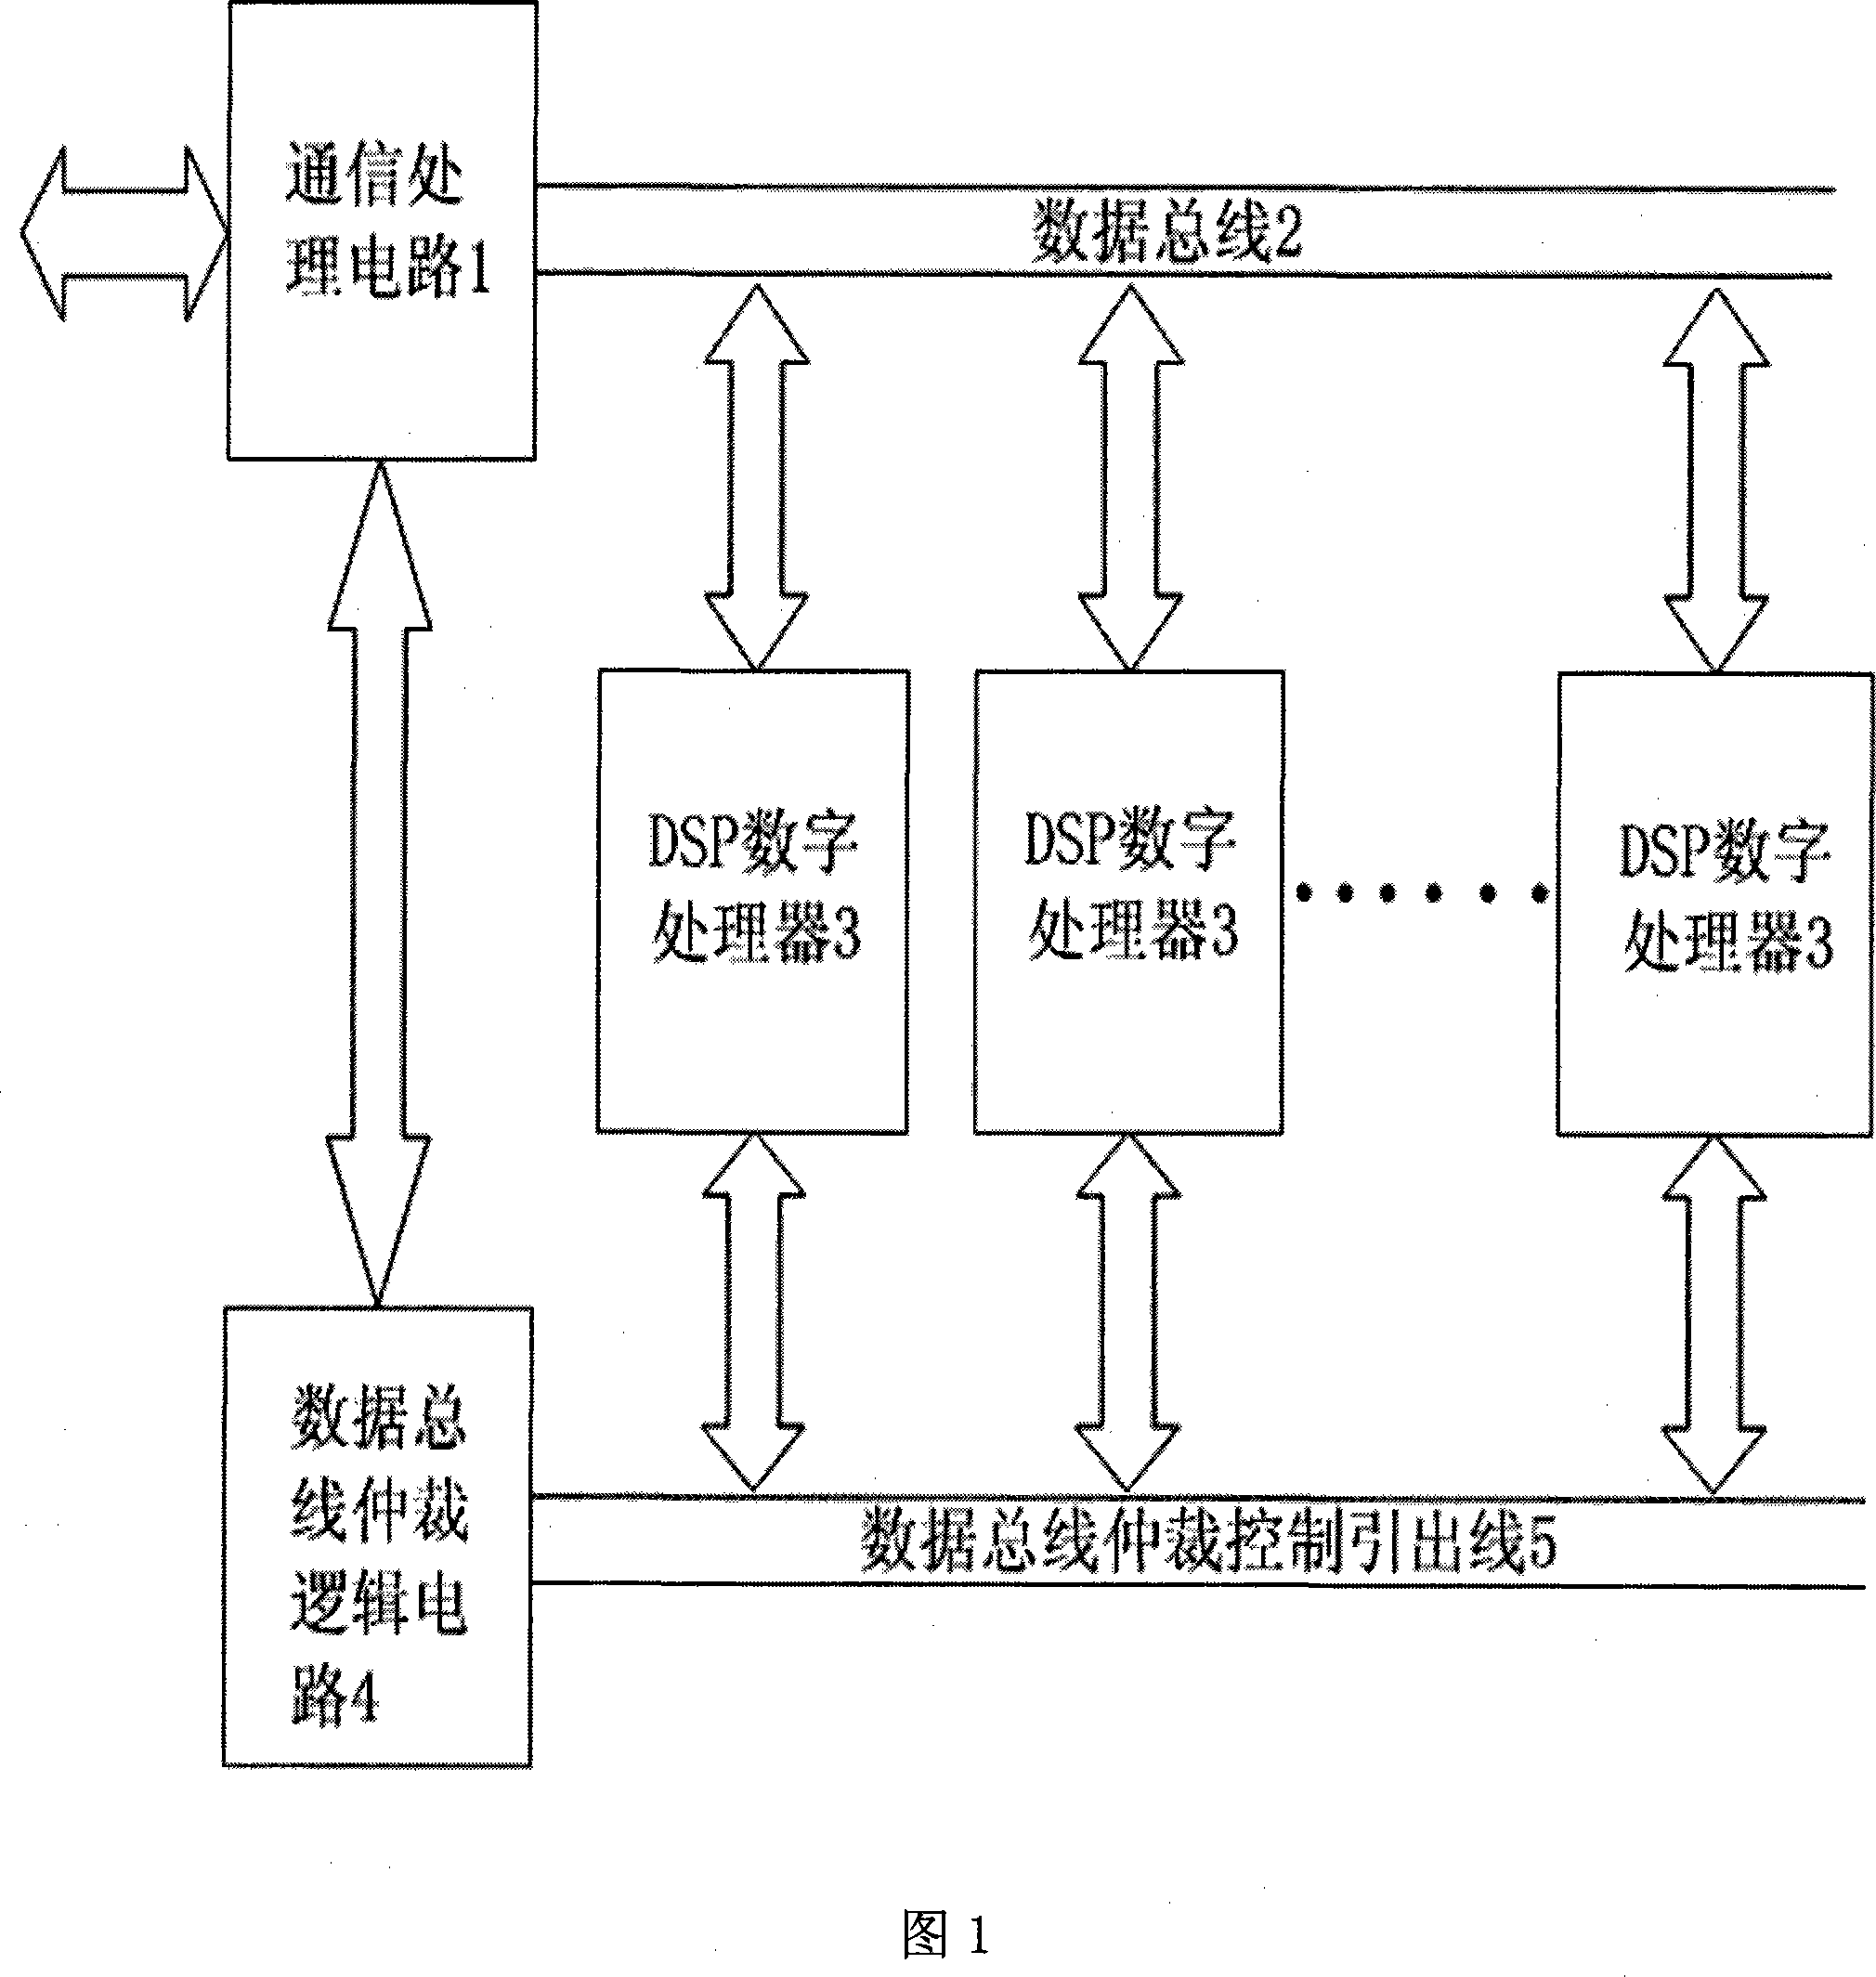 Real time high-speed multi- DSP distribution type processing system